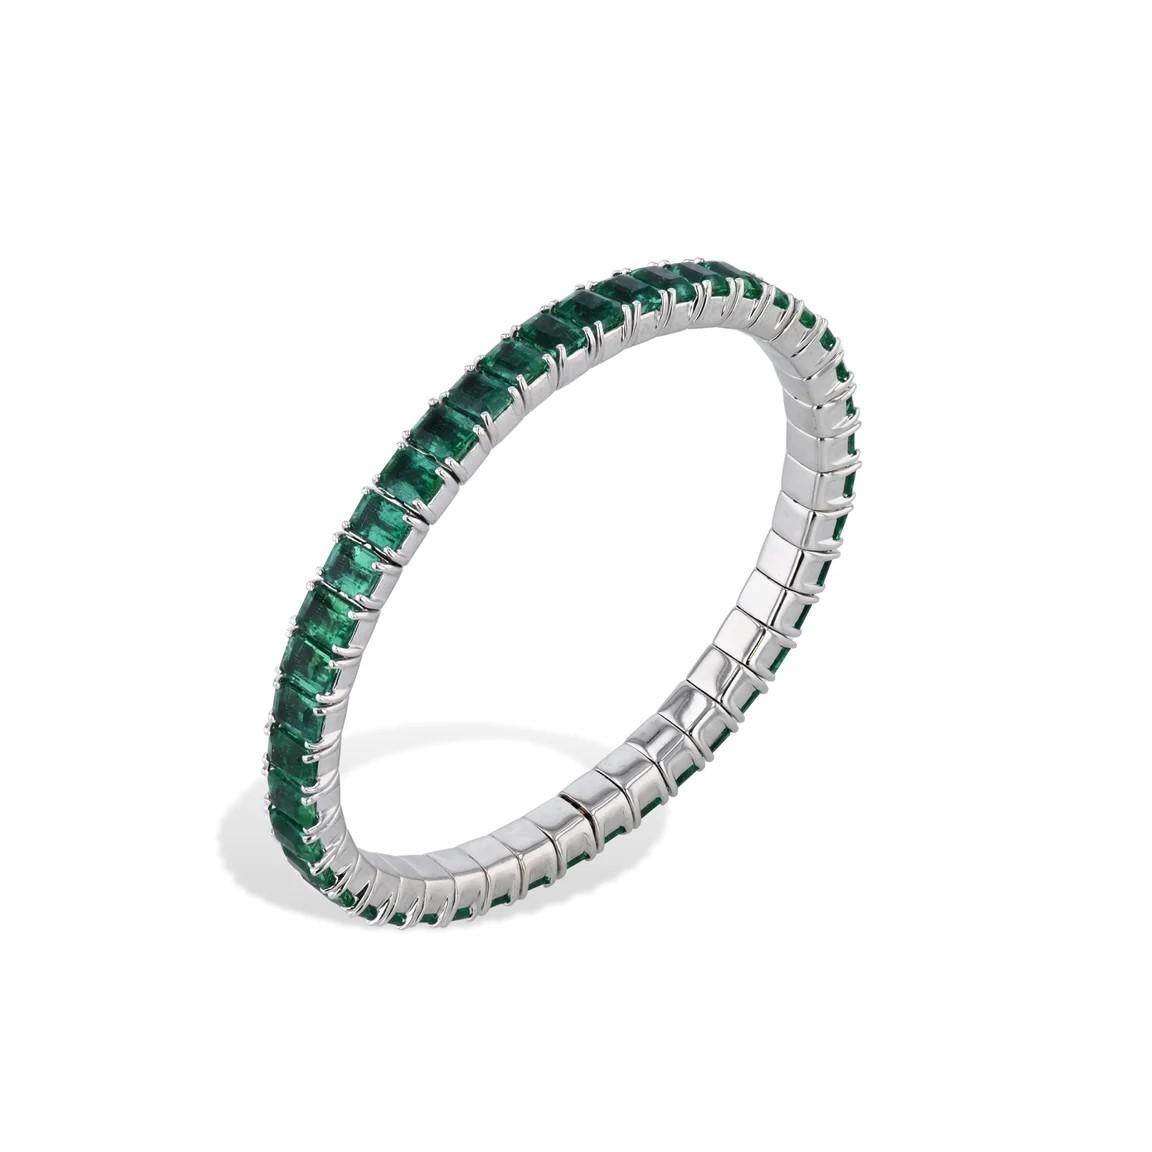 This exquisite 18kt white gold stretch bracelet dazzles with 18.33cts of mesmerizing emerald cut emeralds, in a timeless yet tasteful style. Enjoy effortless on-and-off with its expanding stretching action, and rest assured its outstanding